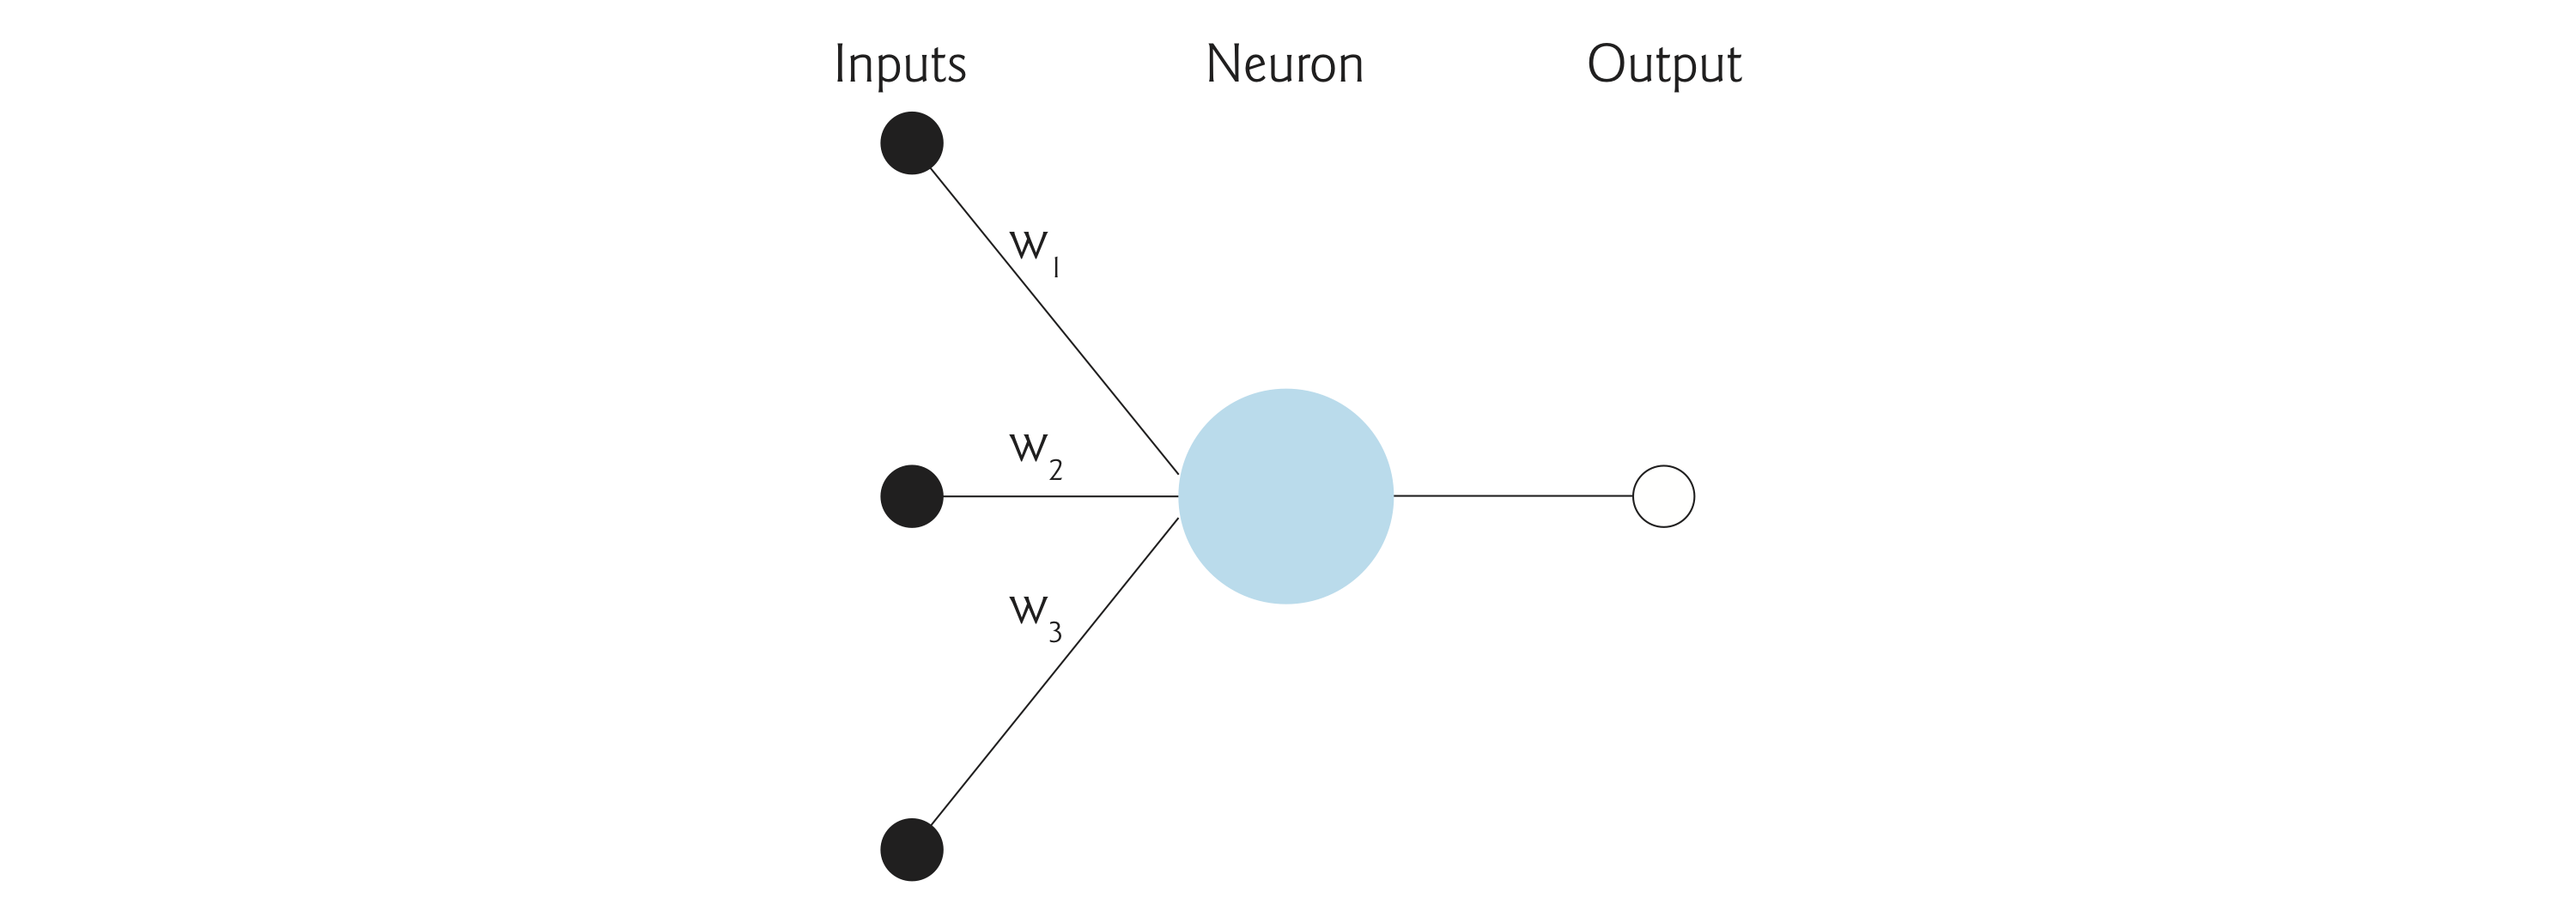 Neuron receiving three inputs (the black dots) and producing an output (the hollow circle) that would be passed to all or some of neurons in the next layer, depending on the types of the neural network’s layers